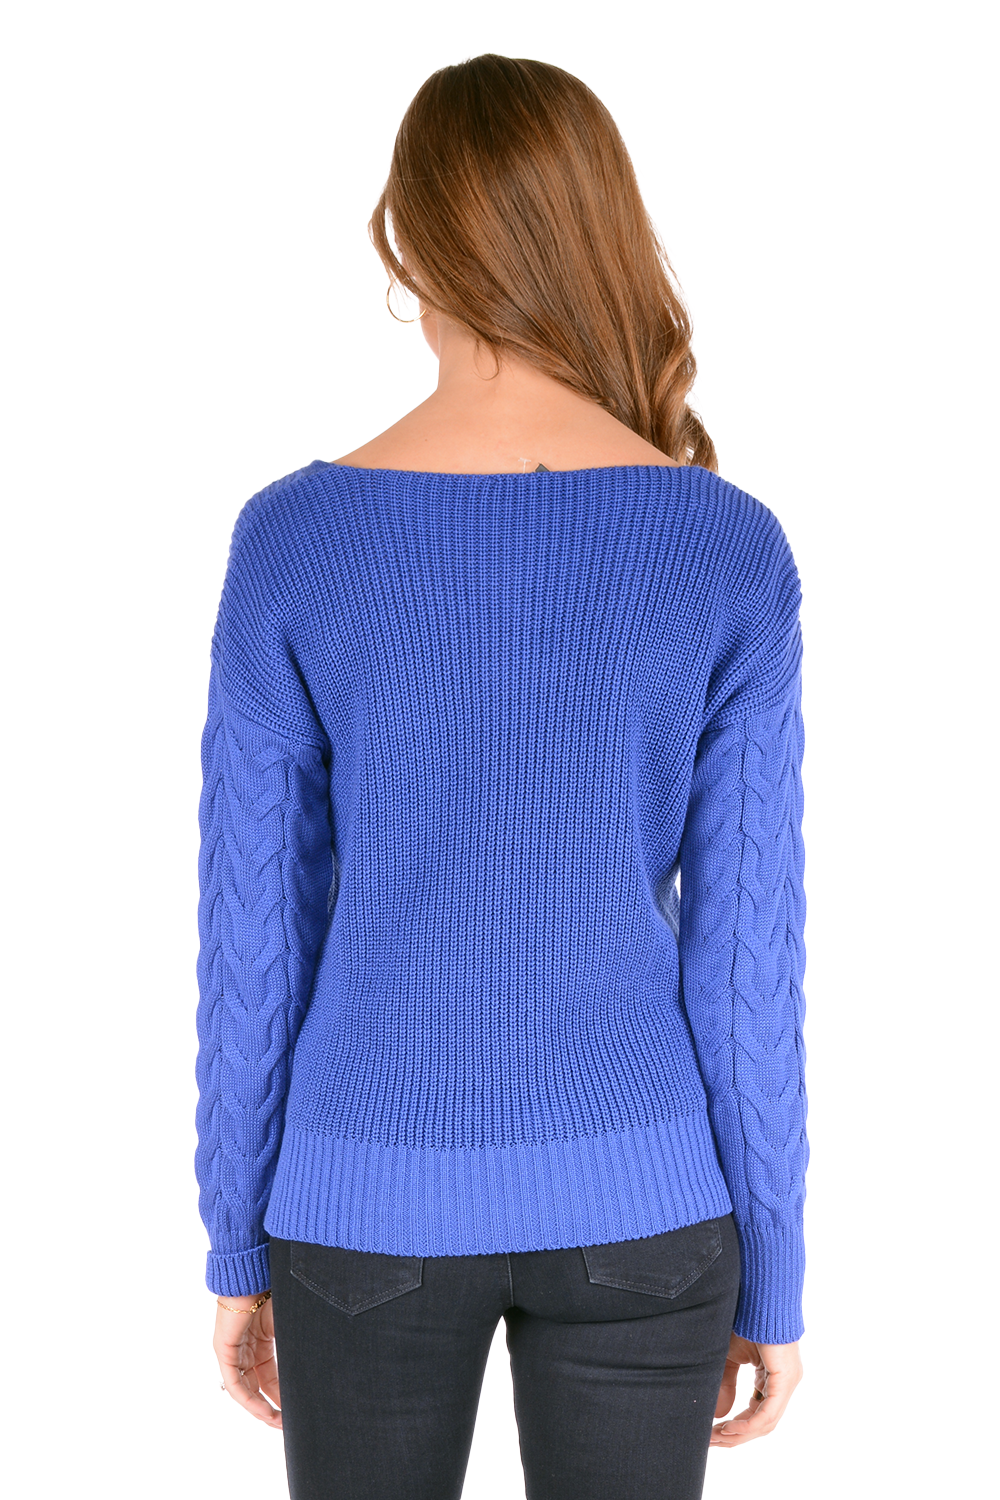 FRENCH KYSS- Sweater